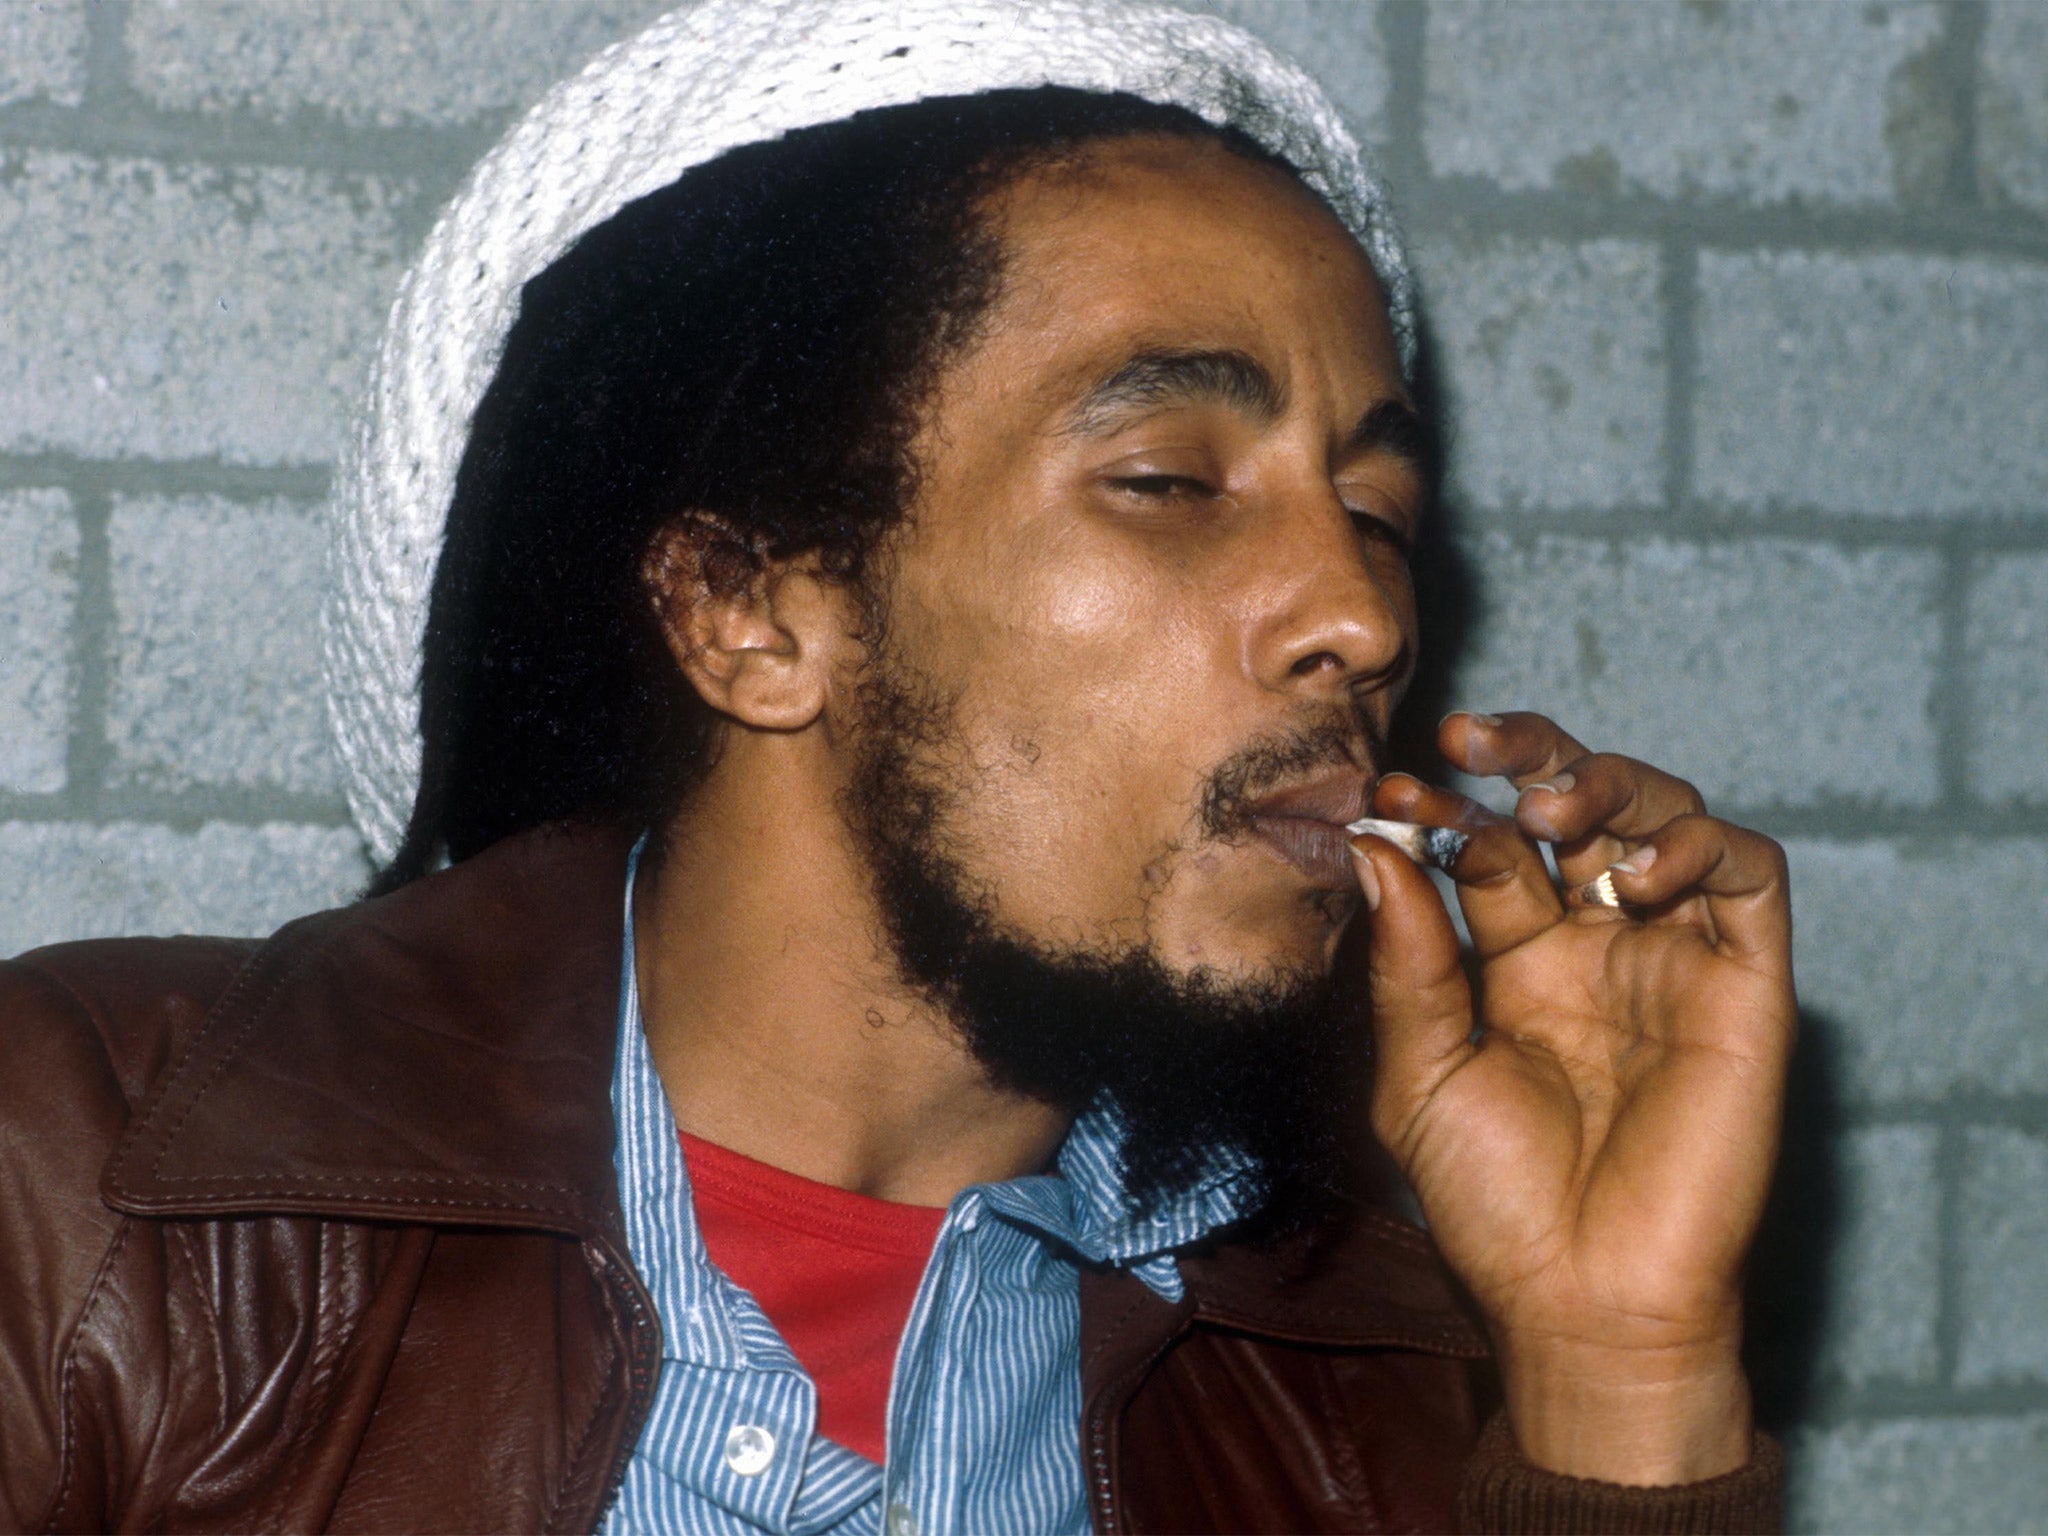 Bob Marley smoking a joint backstage before a gig in Rotterdam